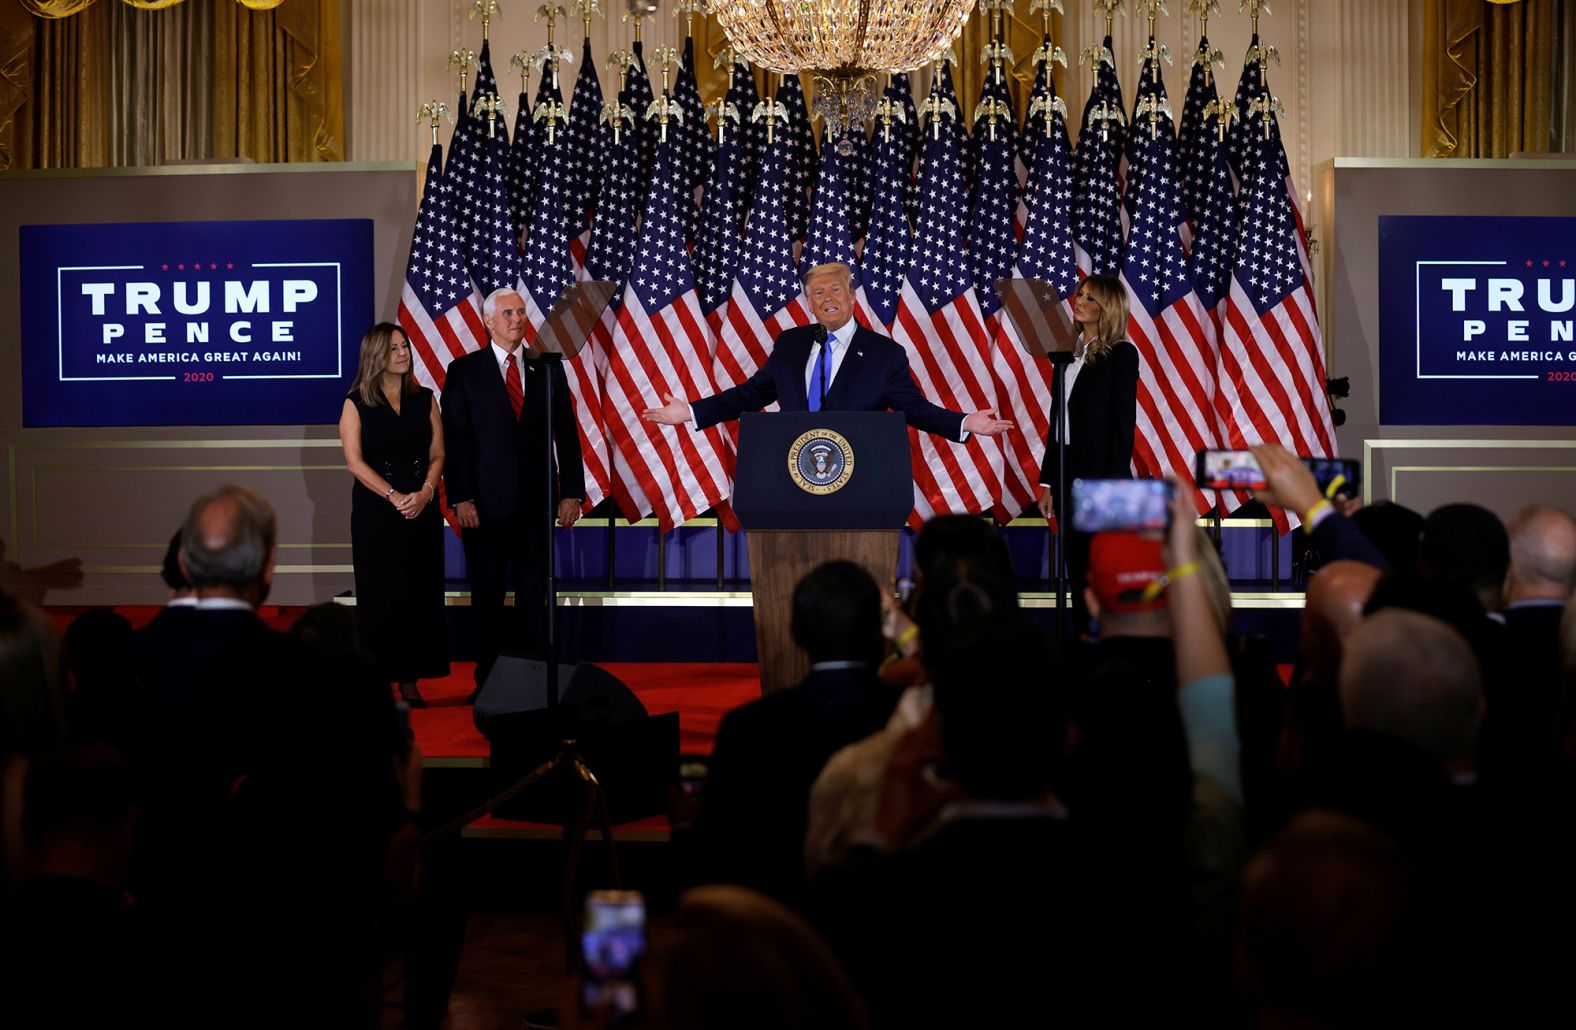 President Donald Trump, speaking from the White House on election night, <a href="index.php?page=&url=https%3A%2F%2Fwww.cnn.com%2Fpolitics%2Flive-news%2Felection-results-and-news-11-03-20%2Fh_5764dd91aa615a8ccba8fdd6d13f07d0" target="_blank">falsely claimed that he had won the election</a> and that fraud was being committed.